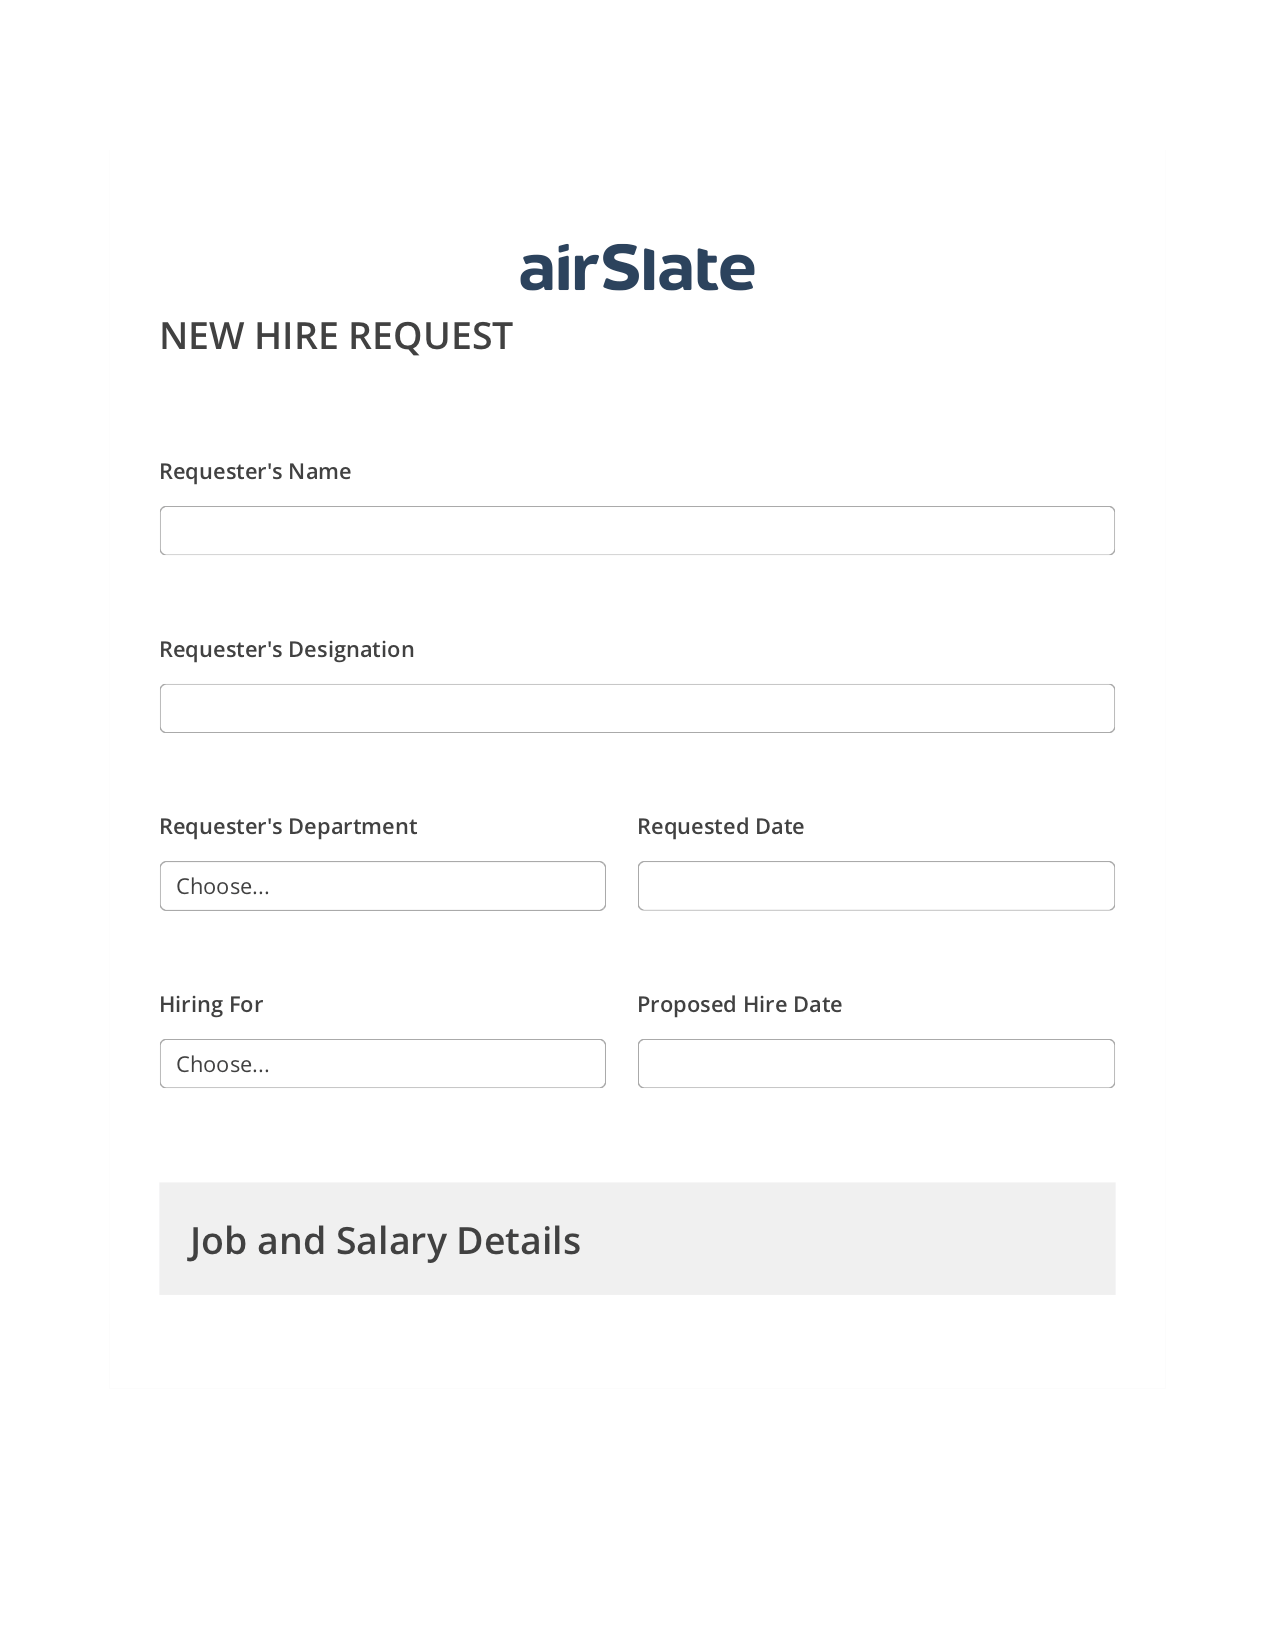 Hiring Request Workflow Prefill from NetSuite records, Lock the Slate Bot, Archive to Dropbox Bot